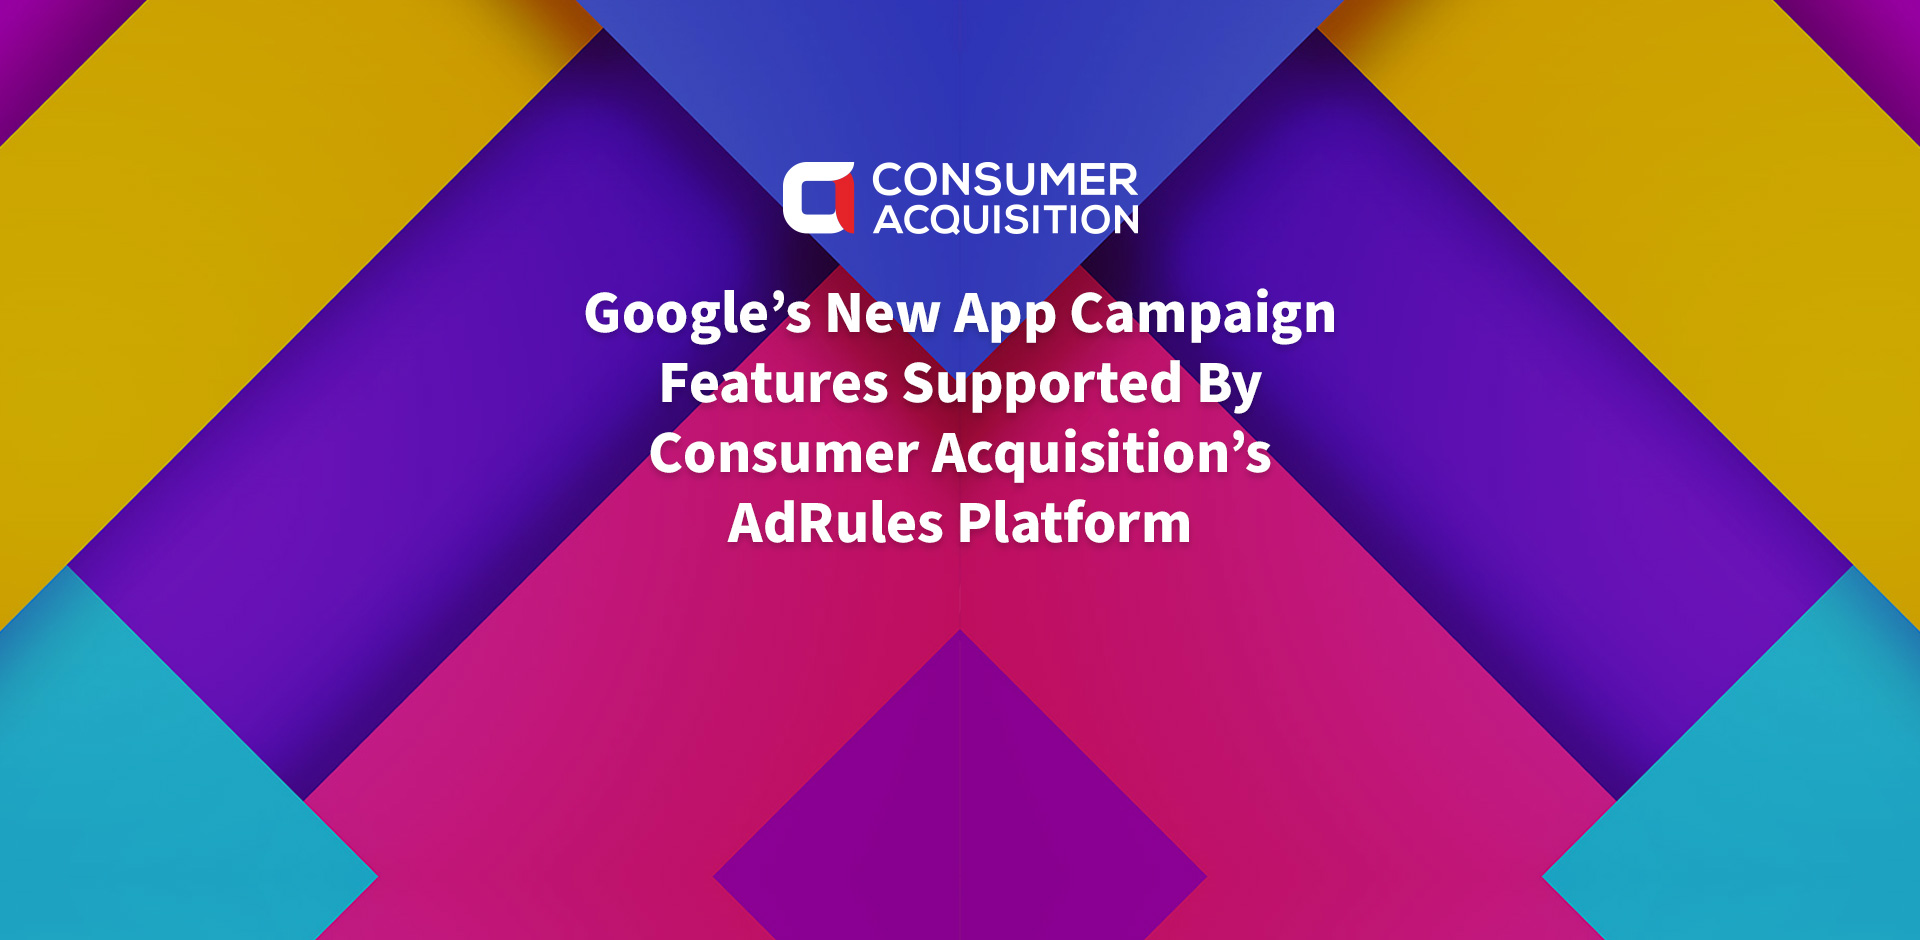 Google’s New App Campaign Features Supported By Consumer Acquisition’s AdRules Platform